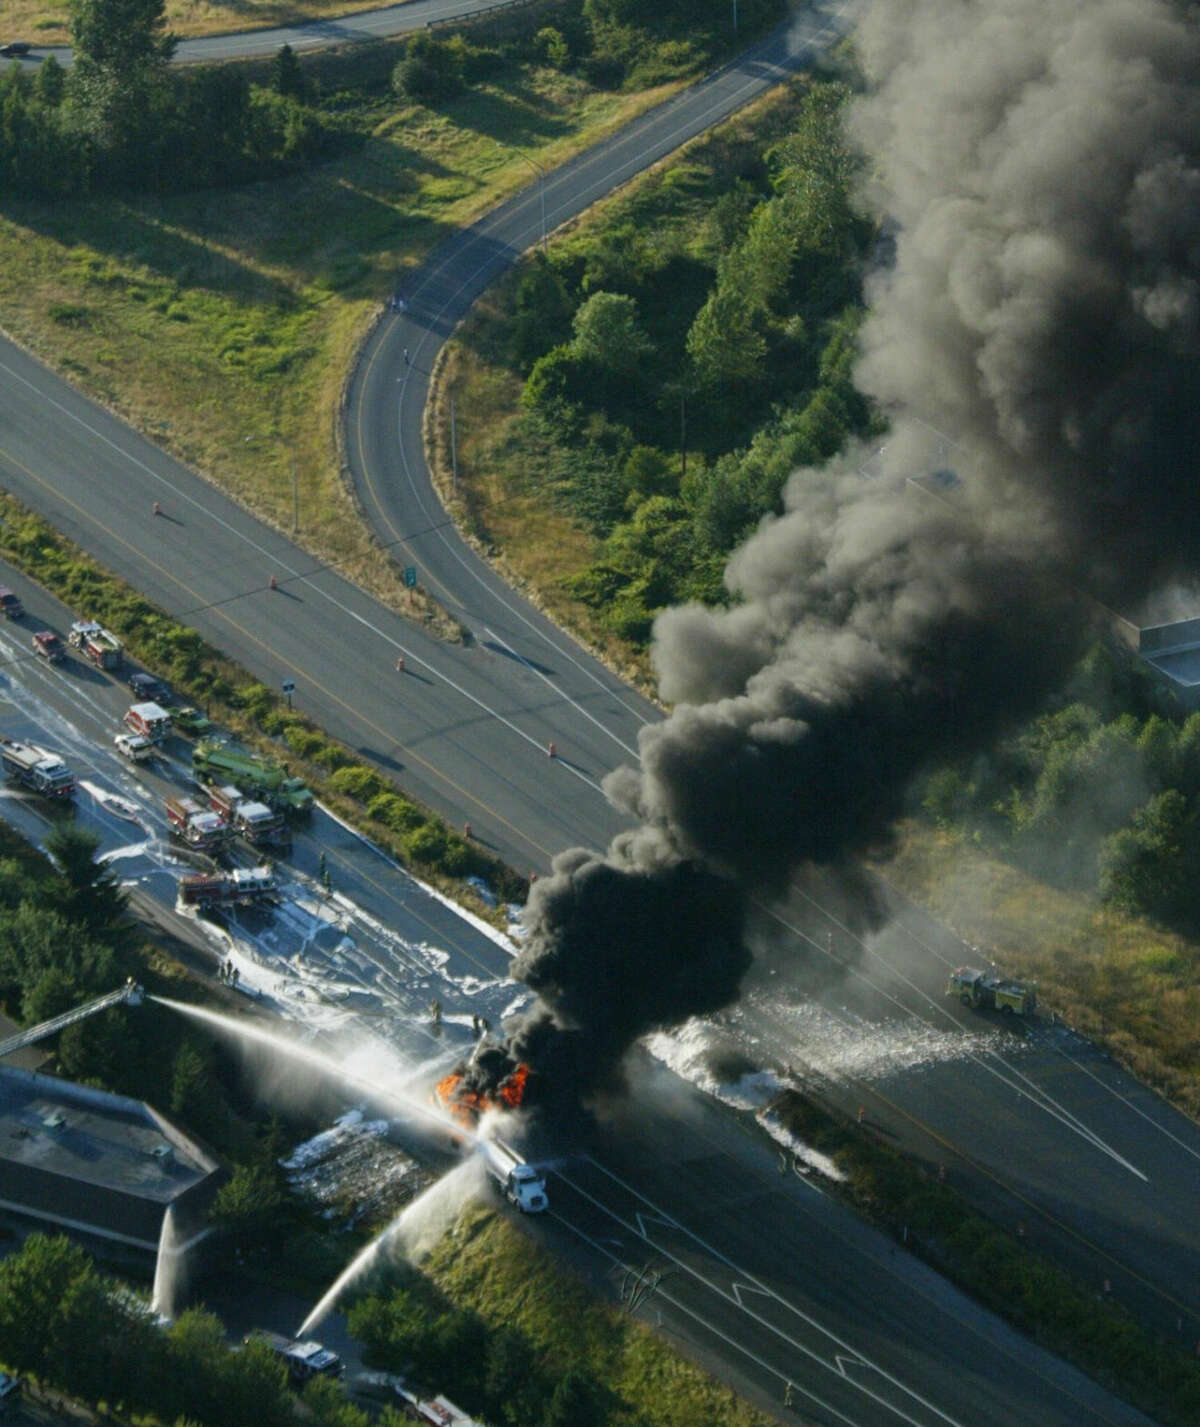 In this aerial photo taken July 16, 2002, firefighting foam is used in an attempt to extinguish a burning fuel tanker truck on Interstate 90 in Issaquah, Wash. The accident took place near one of several wells that supply drinking water to the city of Issaquah. That well is now contaminated and not in use, but the city says it has not confirmed the source of the contamination. The city will install a filtration system on the well by the summer of 2016. (Harley Soltes/The Seattle Times via AP) SEATTLE OUT; USA TODAY OUT; MAGS OUT; TELEVISION OUT; NO SALES; MANDATORY CREDIT TO BOTH THE SEATTLE TIMES AND THE PHOTOGRAPHER